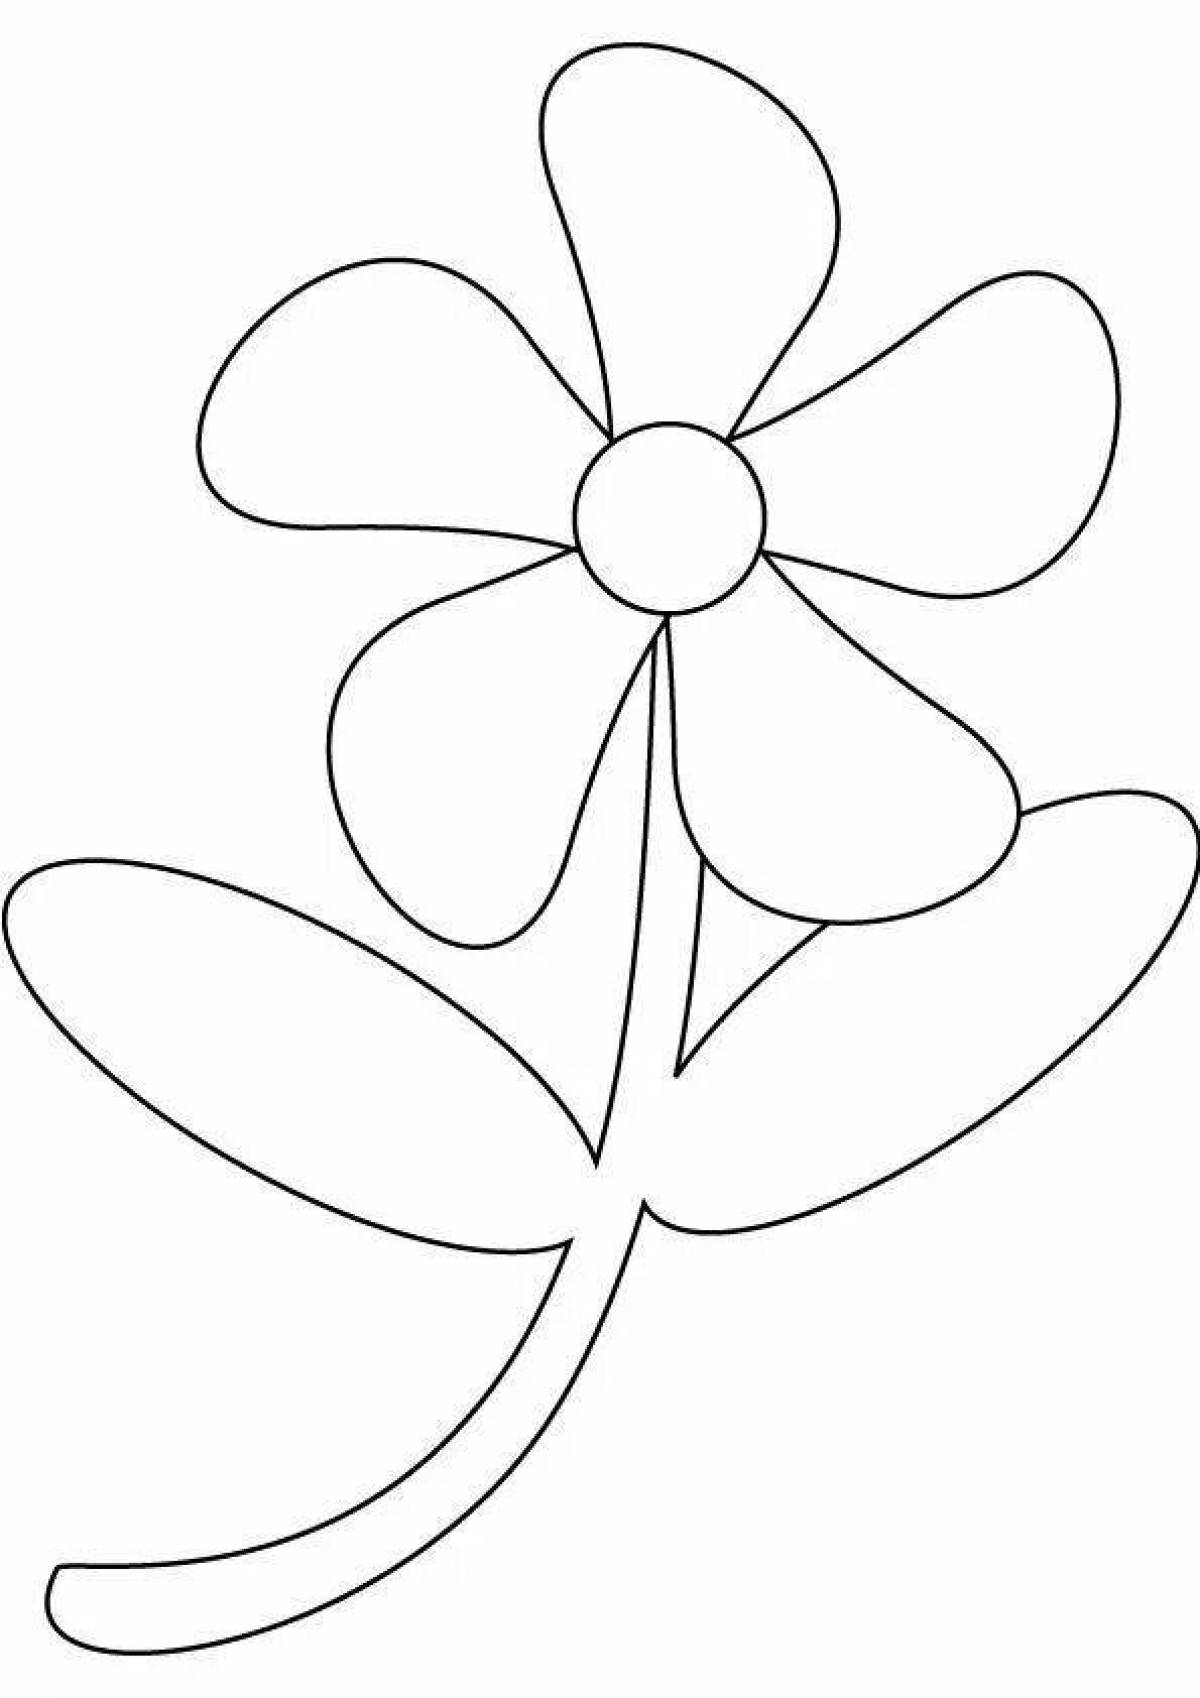 Exquisite flower coloring page with seven colors pattern